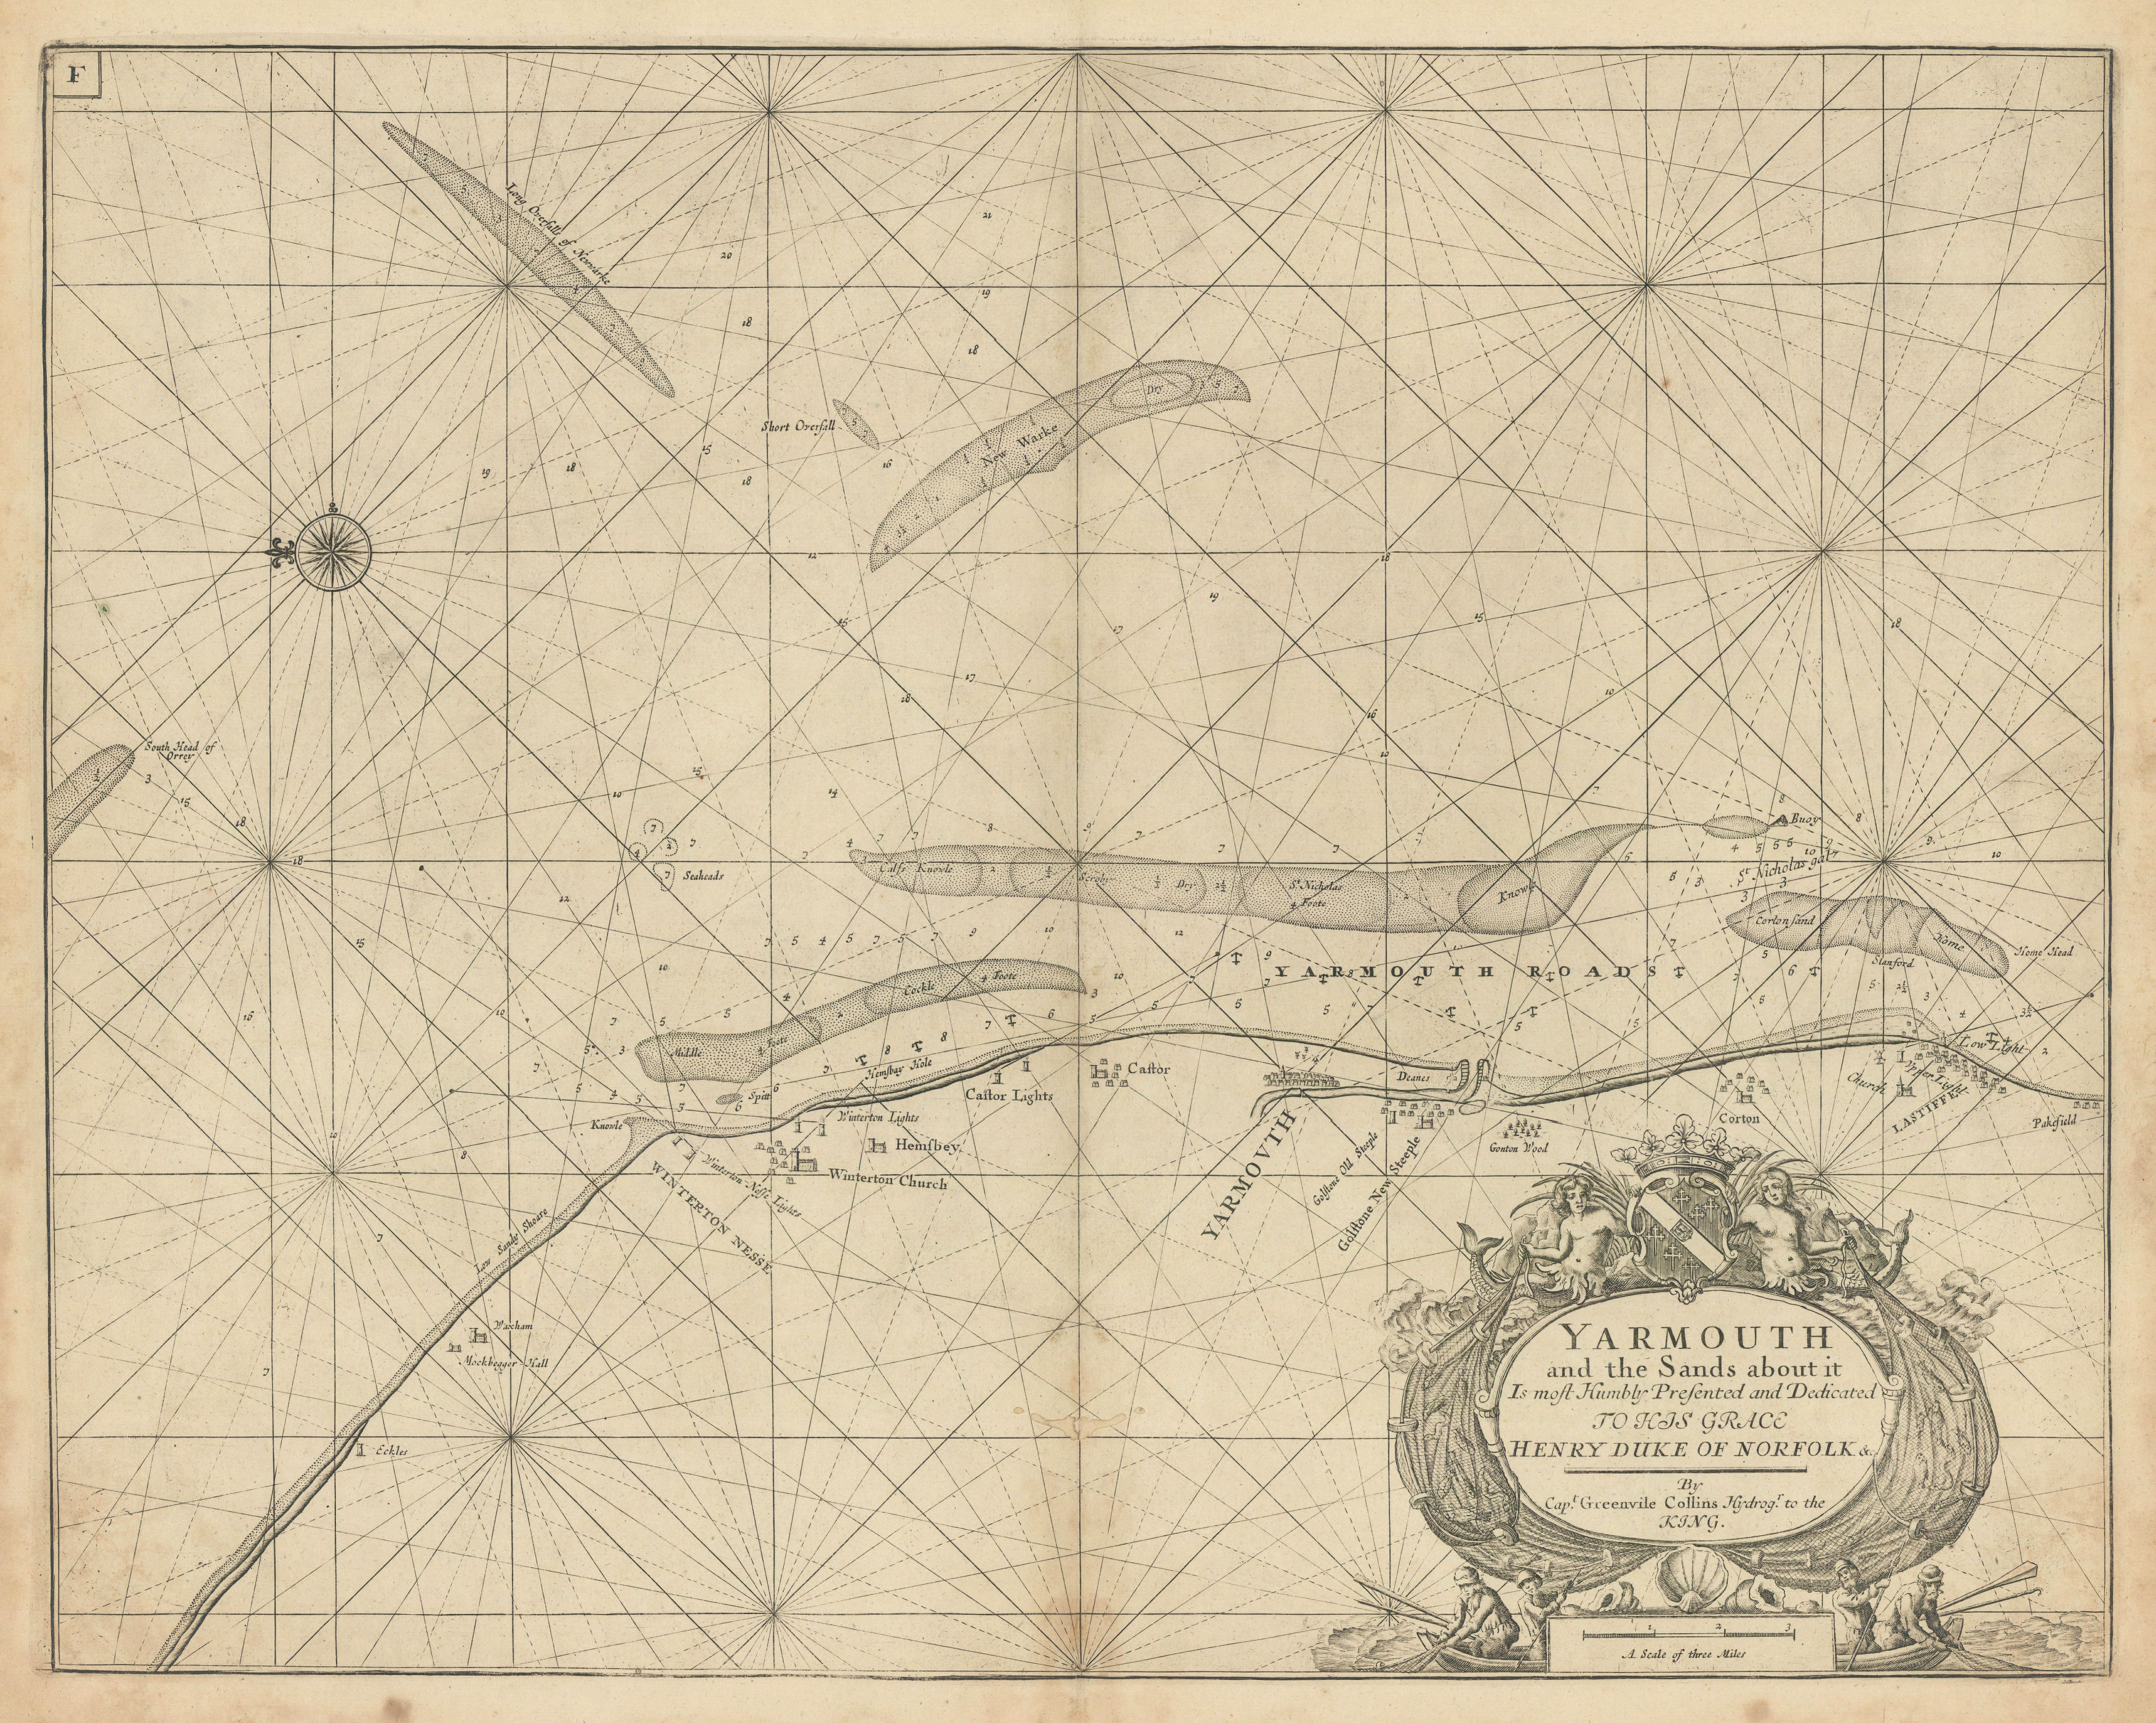 Associate Product Great Yarmouth and the sands about it sea chart. Lowestoft. COLLINS 1723 map